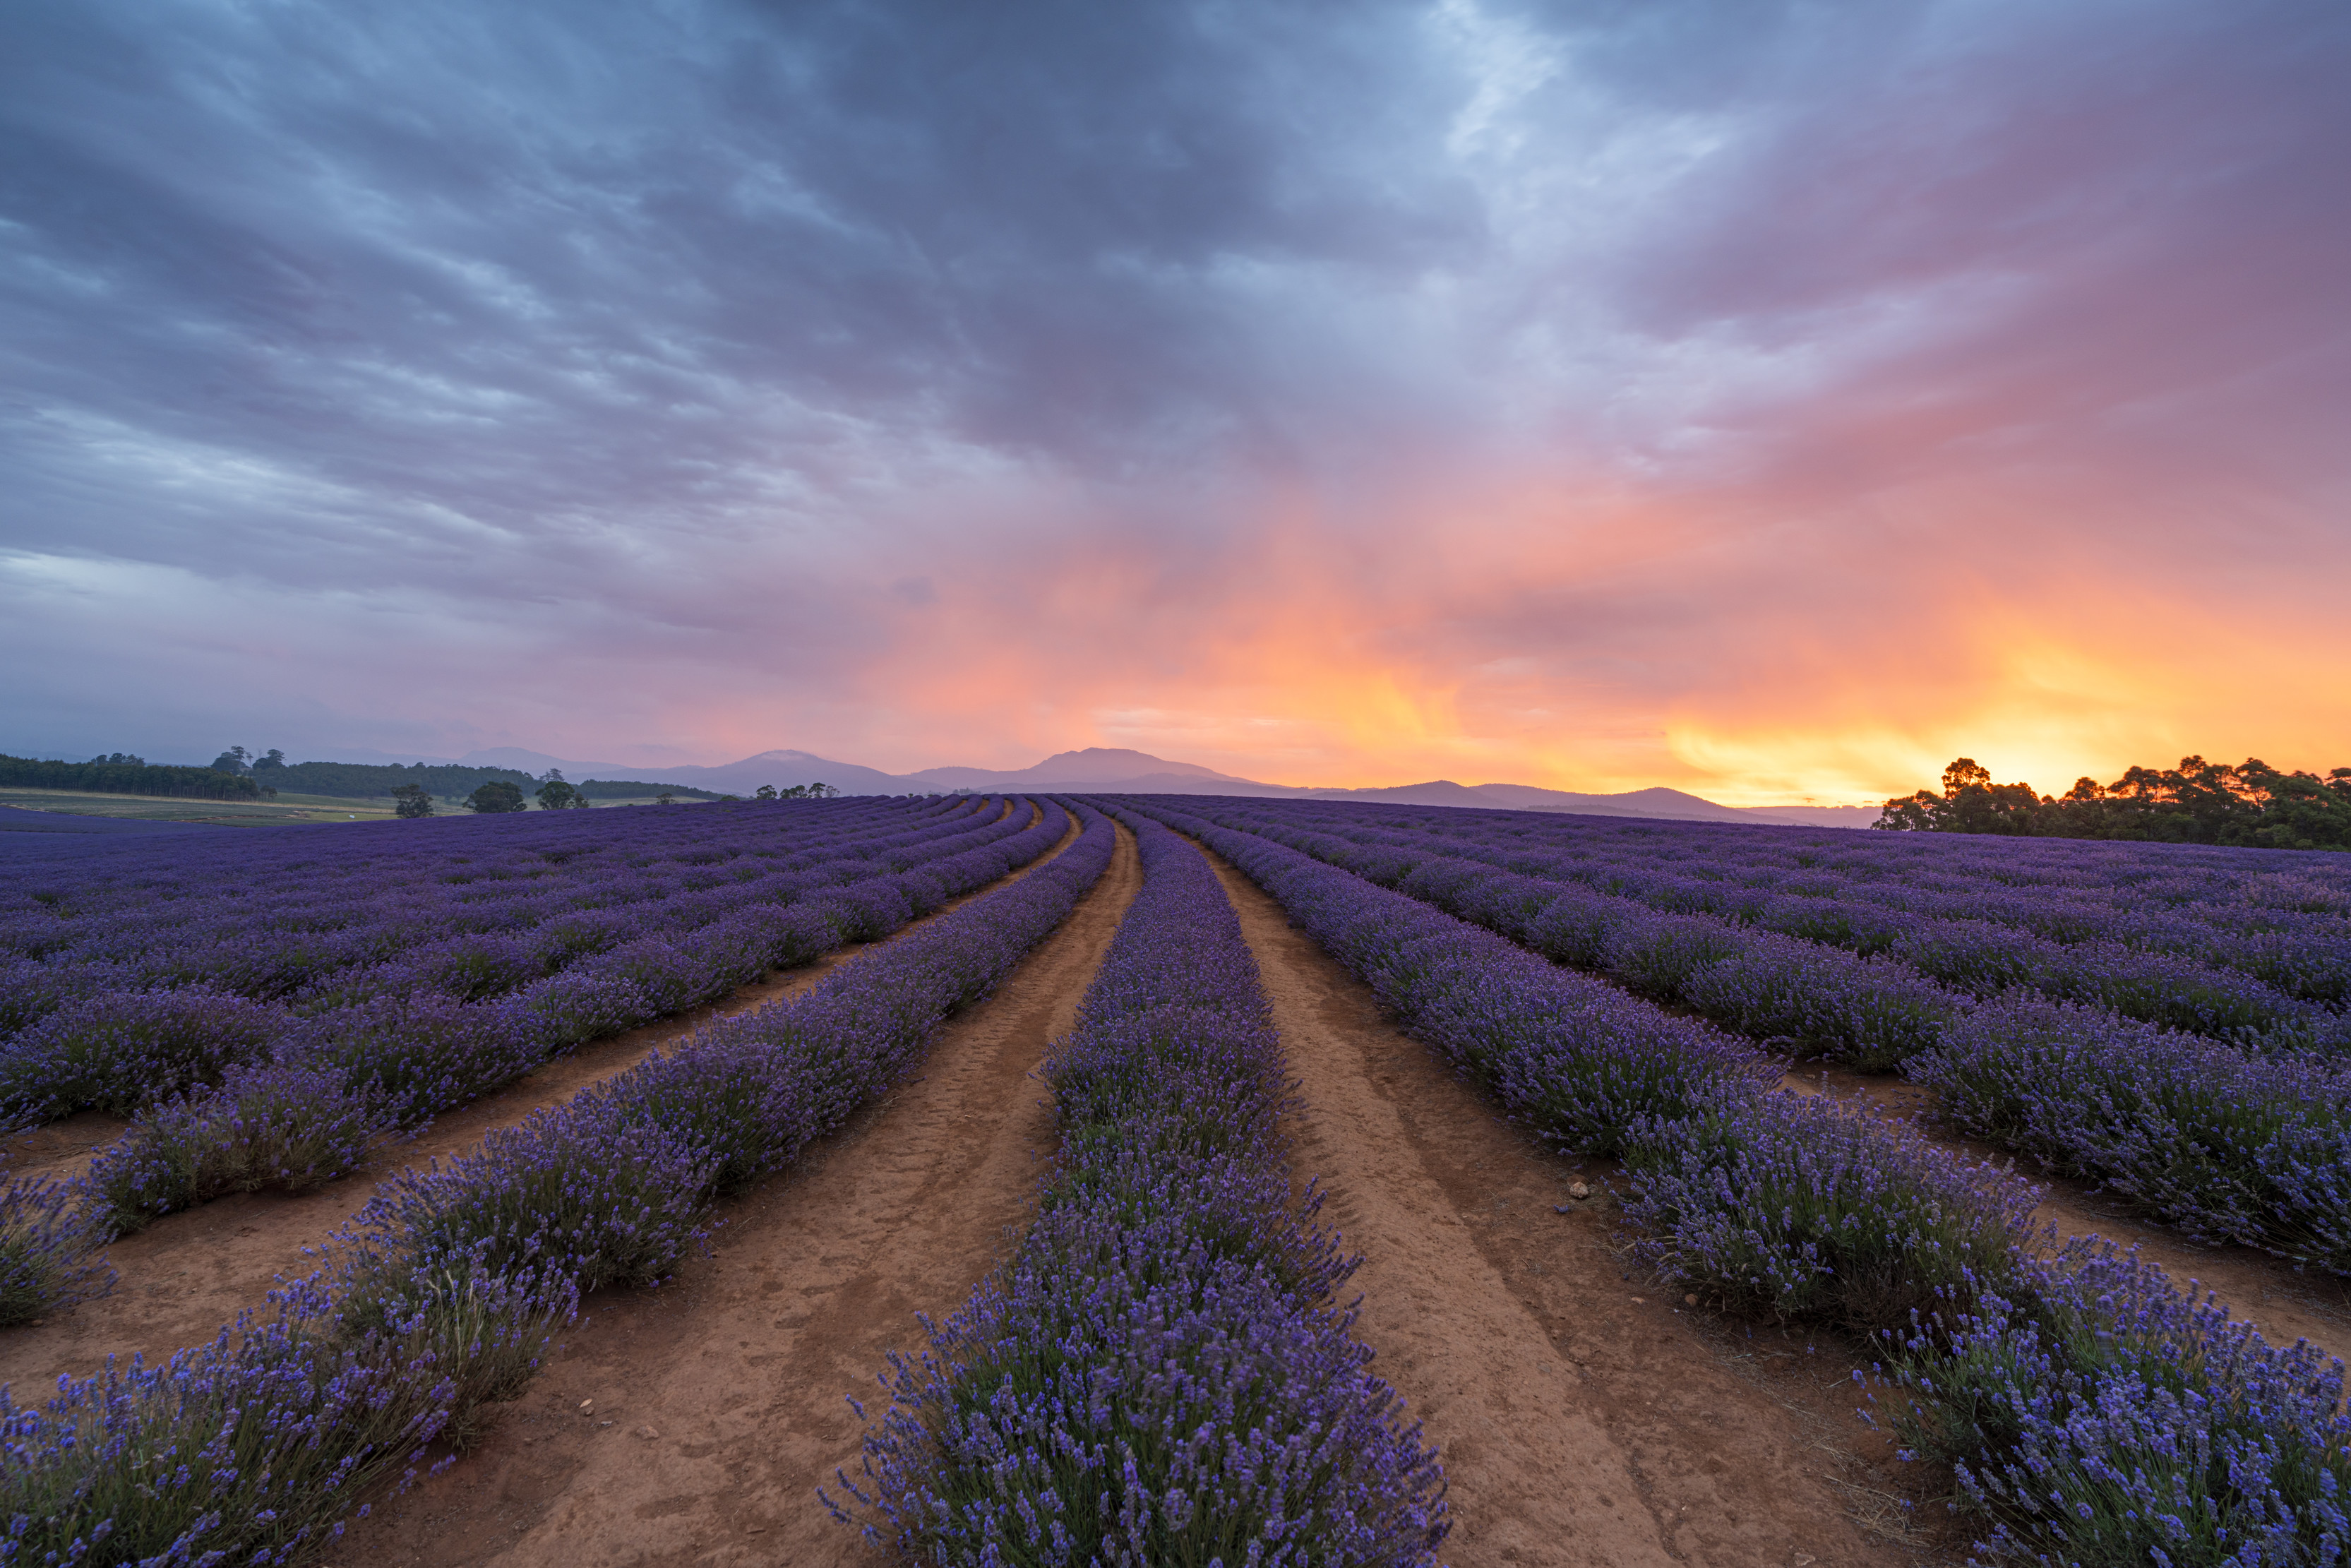 Rows of lavender growing with sunrise/sunset in the background. Bridestowe Lavender Estate, at Nabowla.